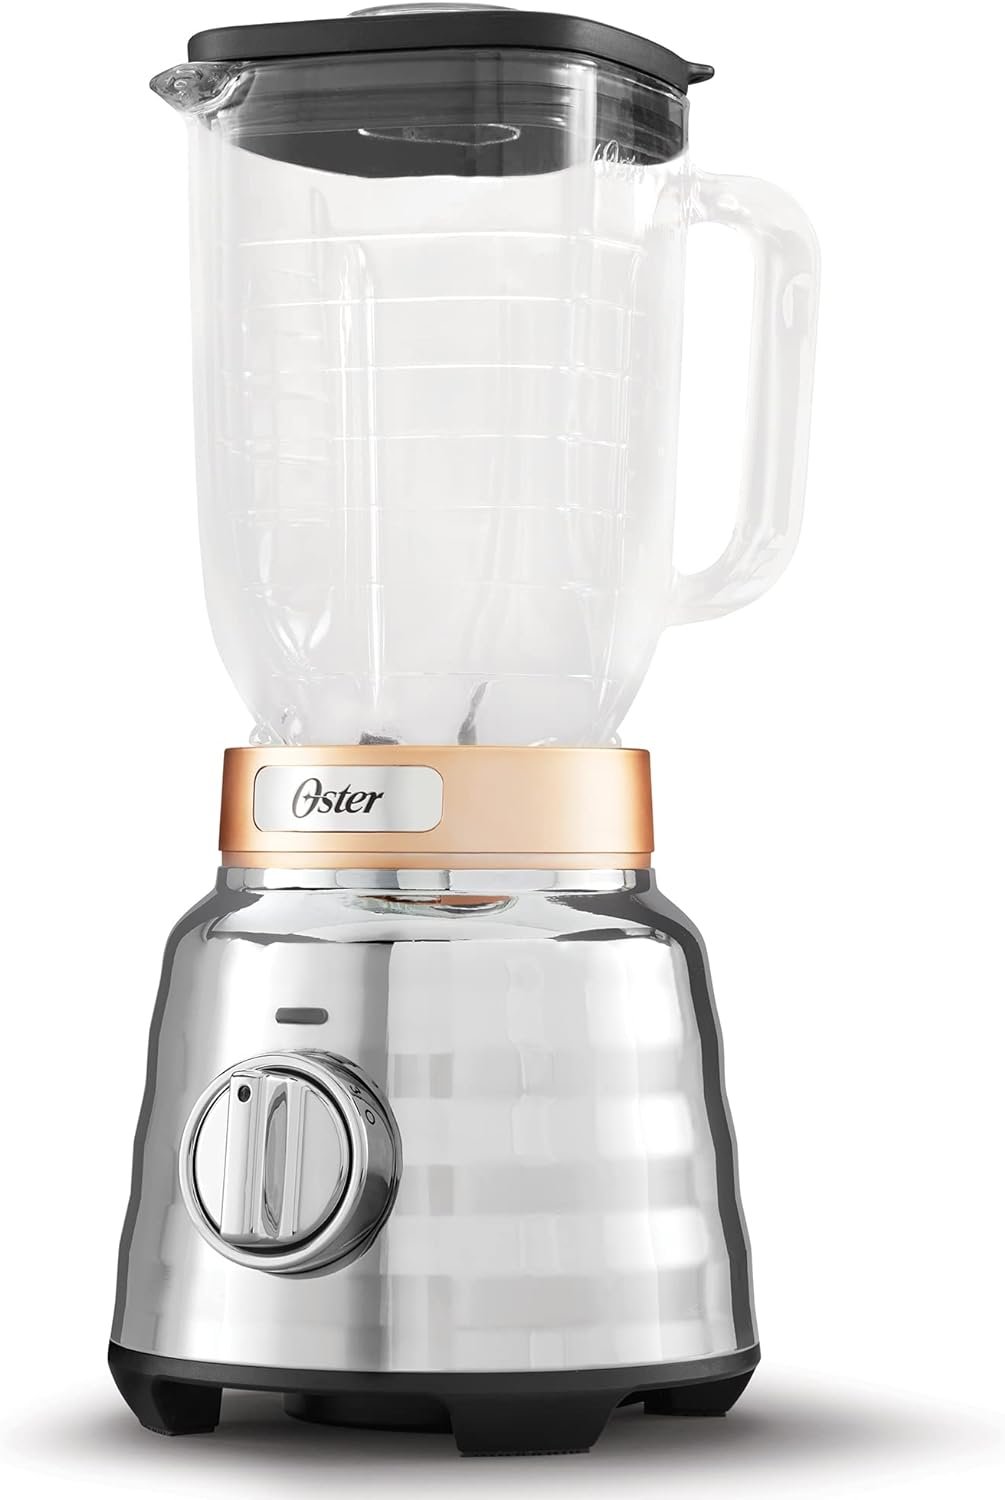 Oster Beehive Blender Review